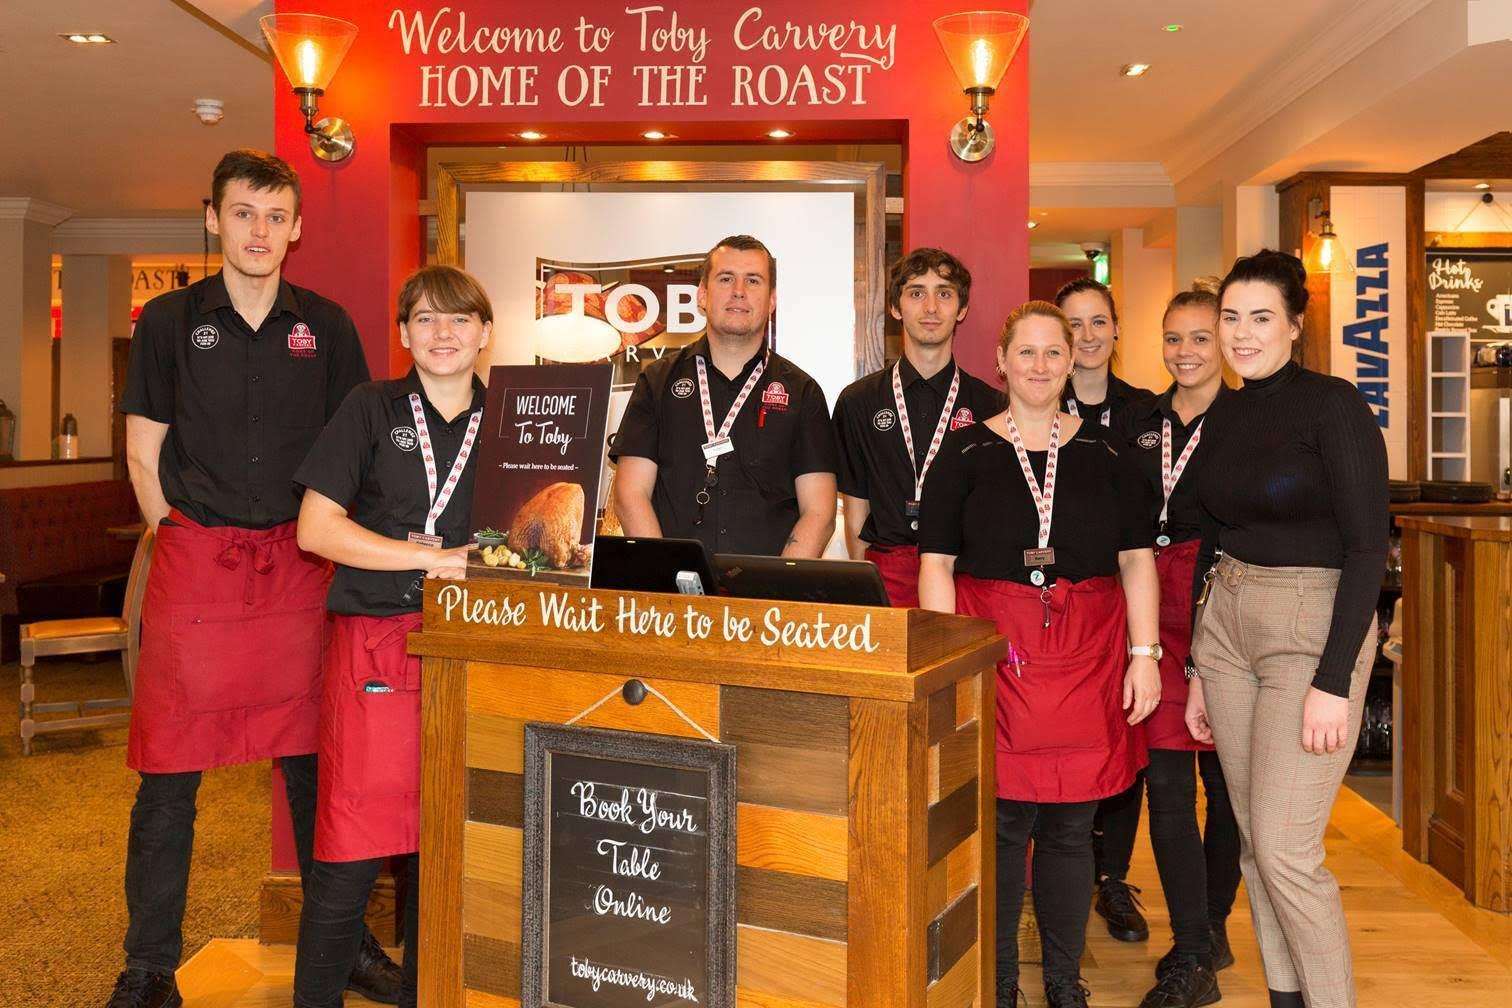 The staff look forward to welcoming you